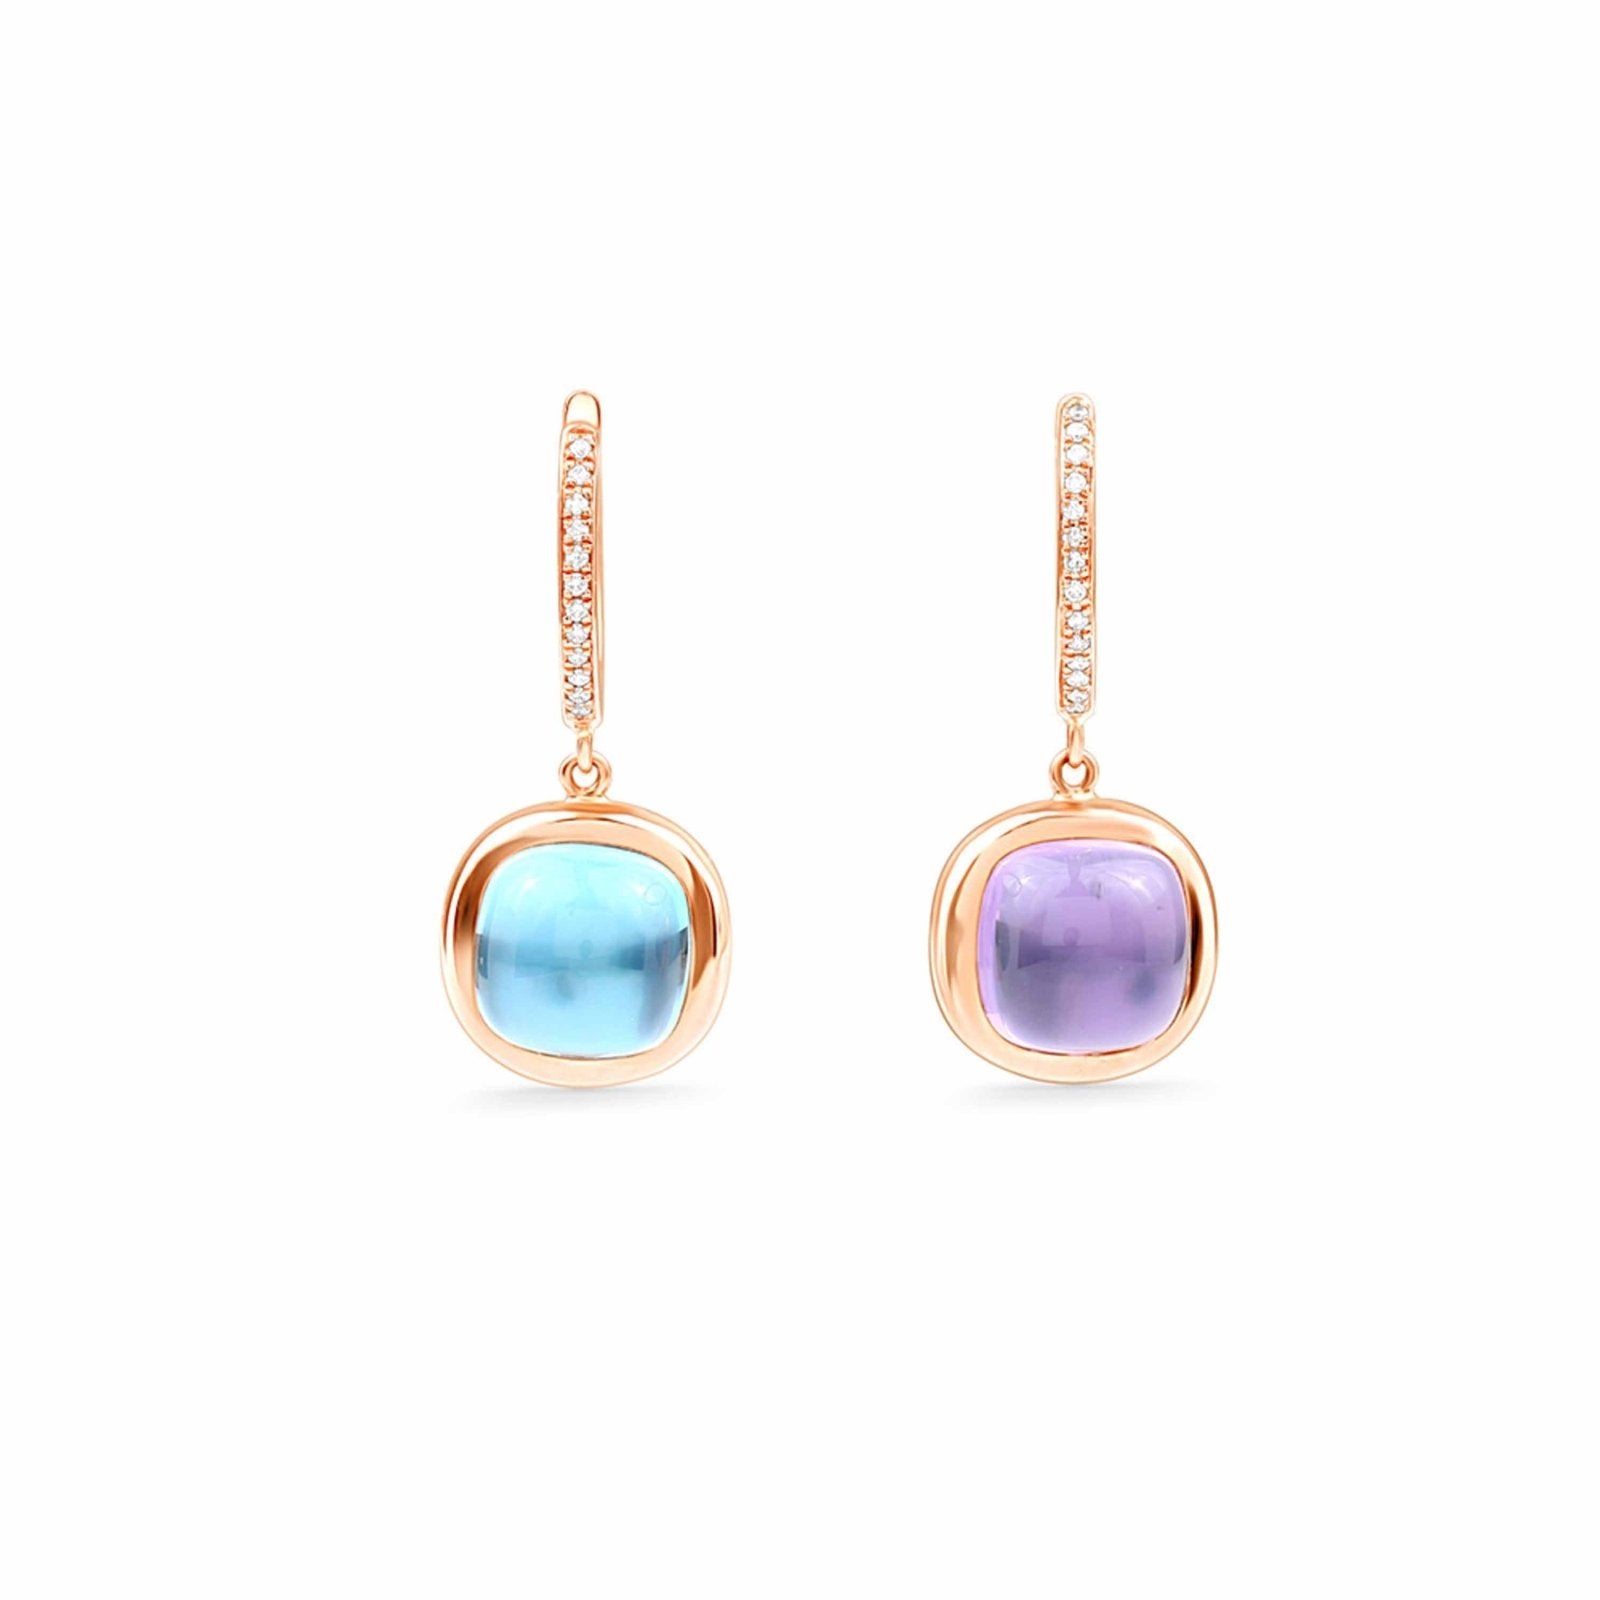 Reversible Bezel Set Amethyst and Blue Topaz Diamond Hoops Earrings Estella Collection #product_description# 14k Amethyst Birthstone #tag4# #tag5# #tag6# #tag7# #tag8# #tag9# #tag10#